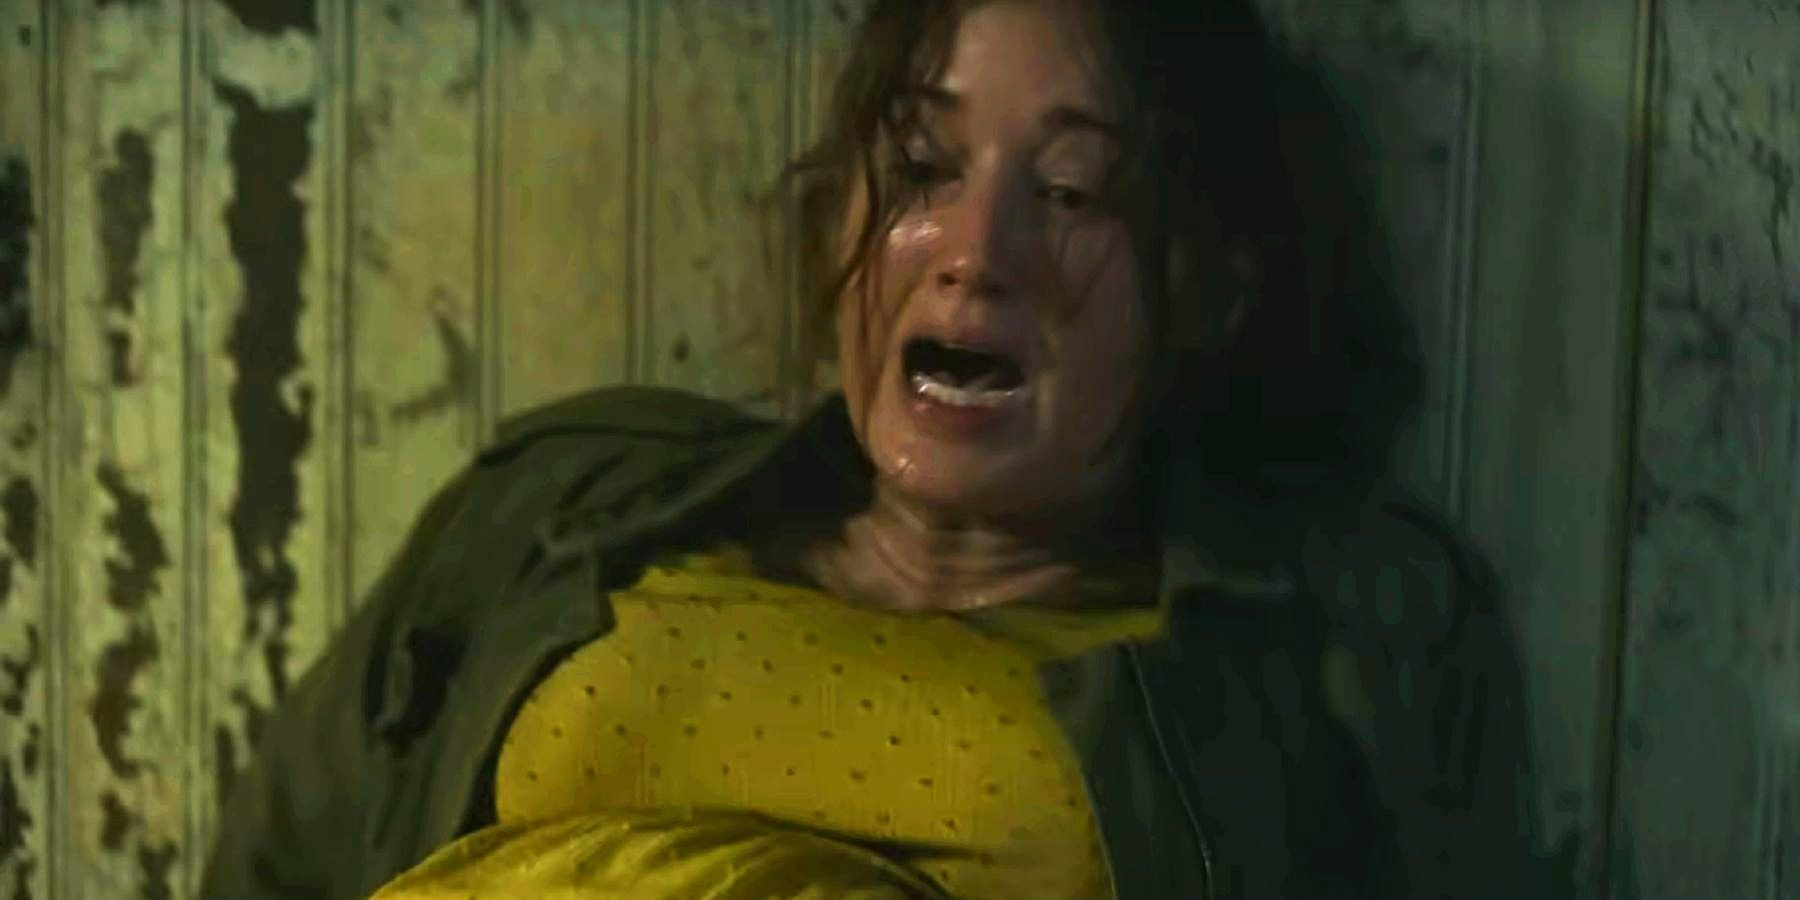 Anna screaming in a room in The Last of Us while giving birth